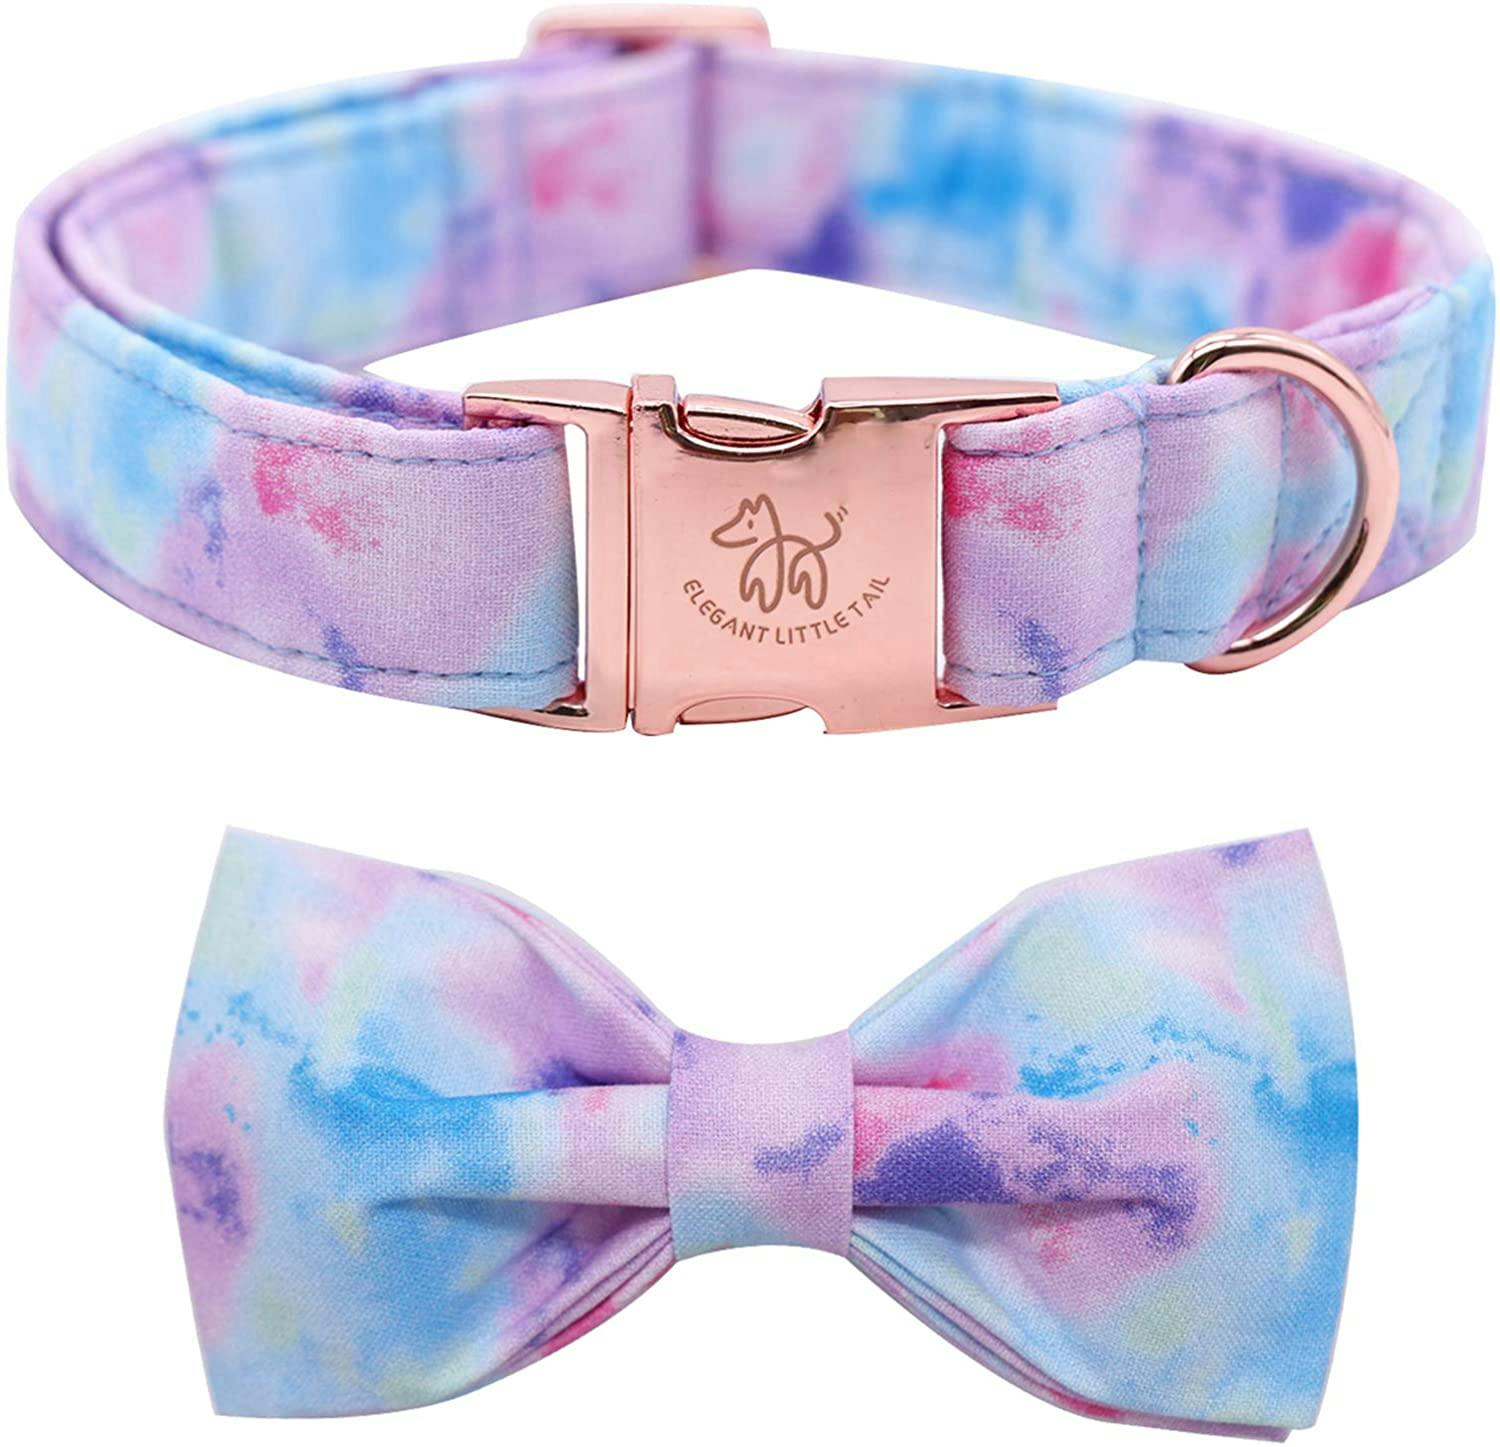 Elegant little tail Dog Collar with Bow, Soft&Comfy Bowtie Dog Collar ...